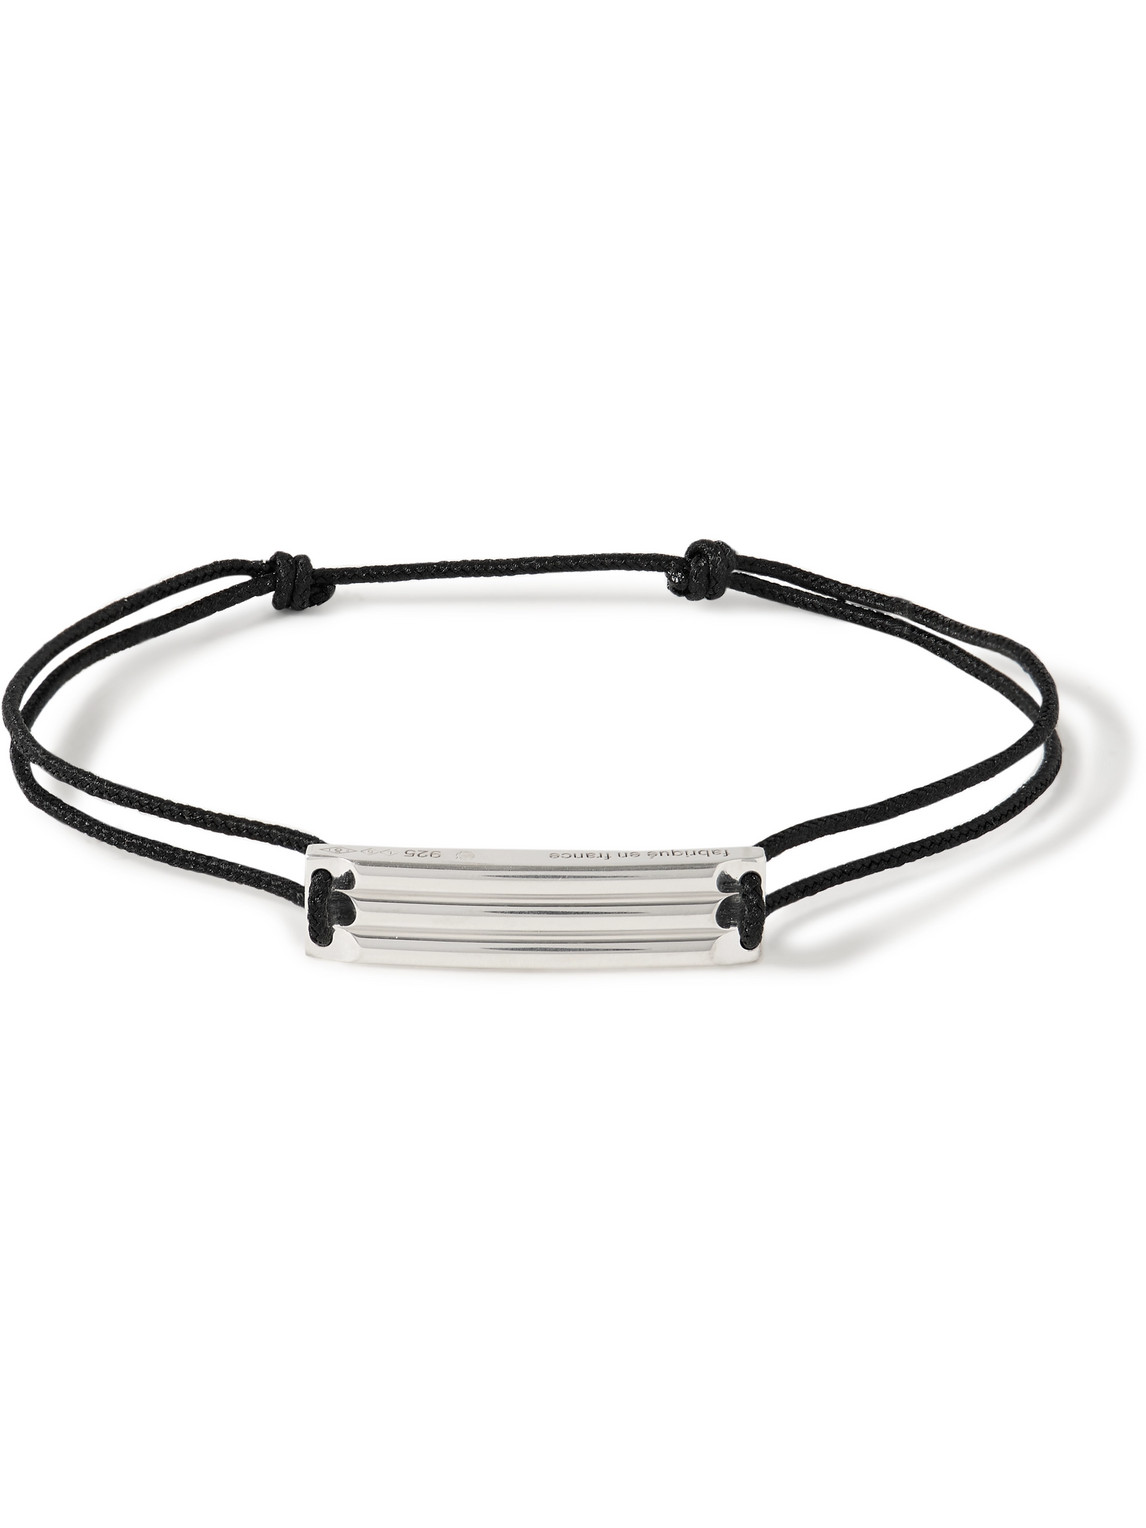 Le Gramme Godron 5g Waxed-cord And Recycled Sterling Silver Bracelet In Black